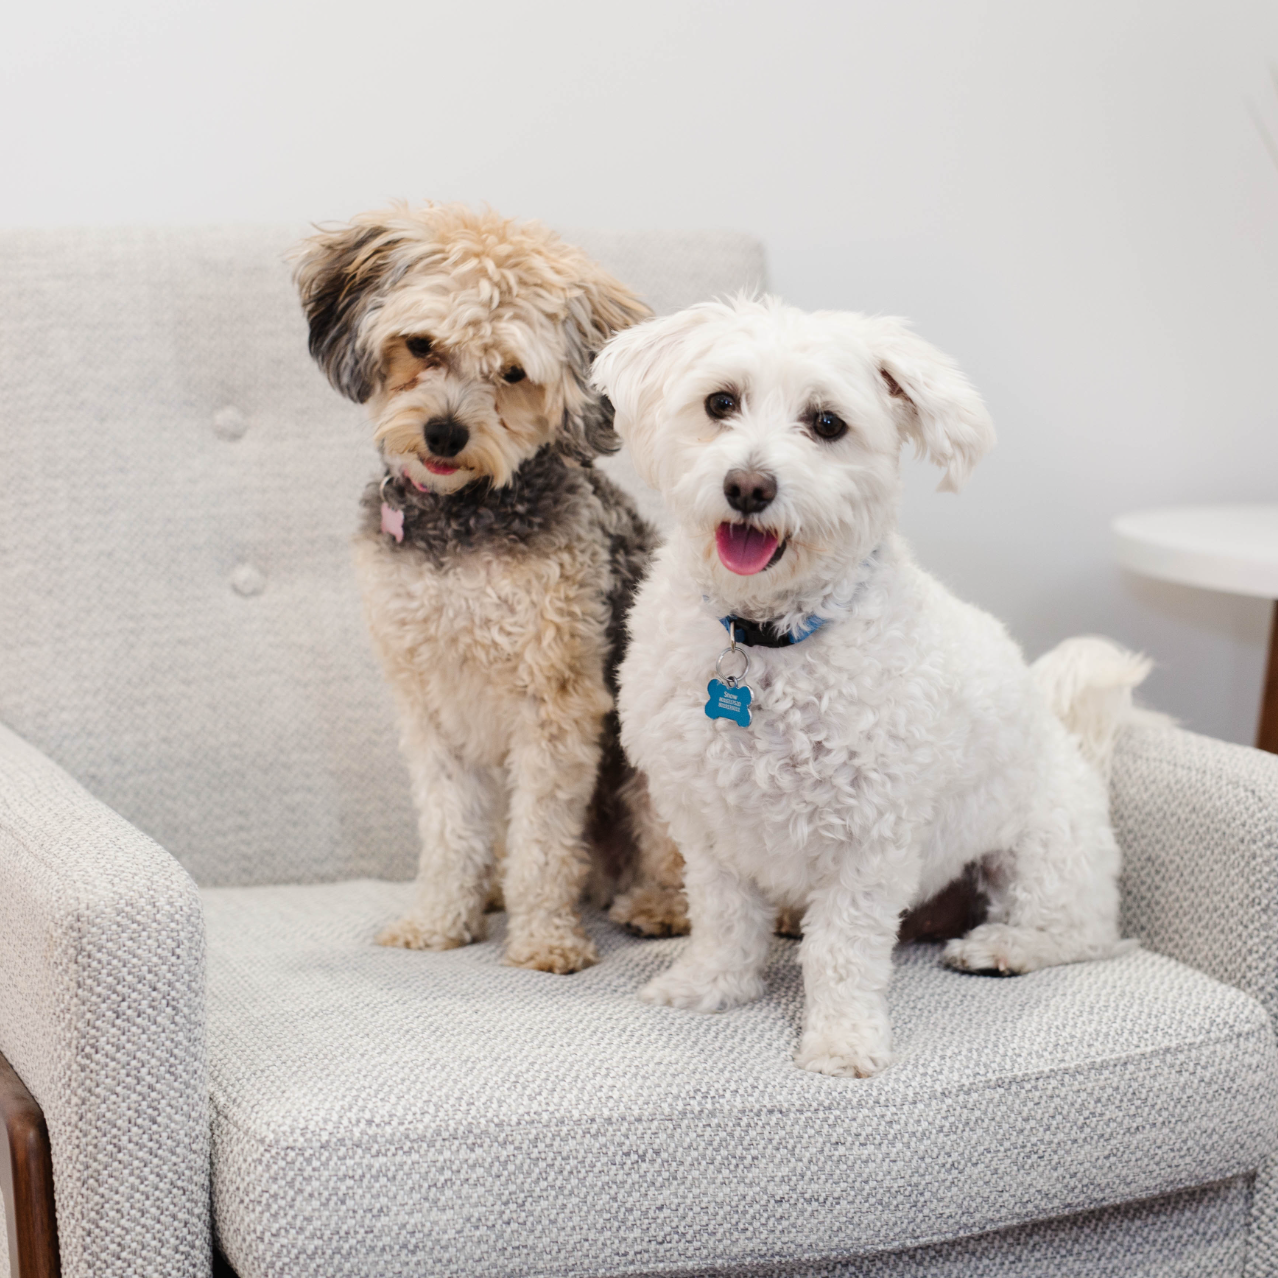 two short-haired hypoallergenic dogs sitting on a chair